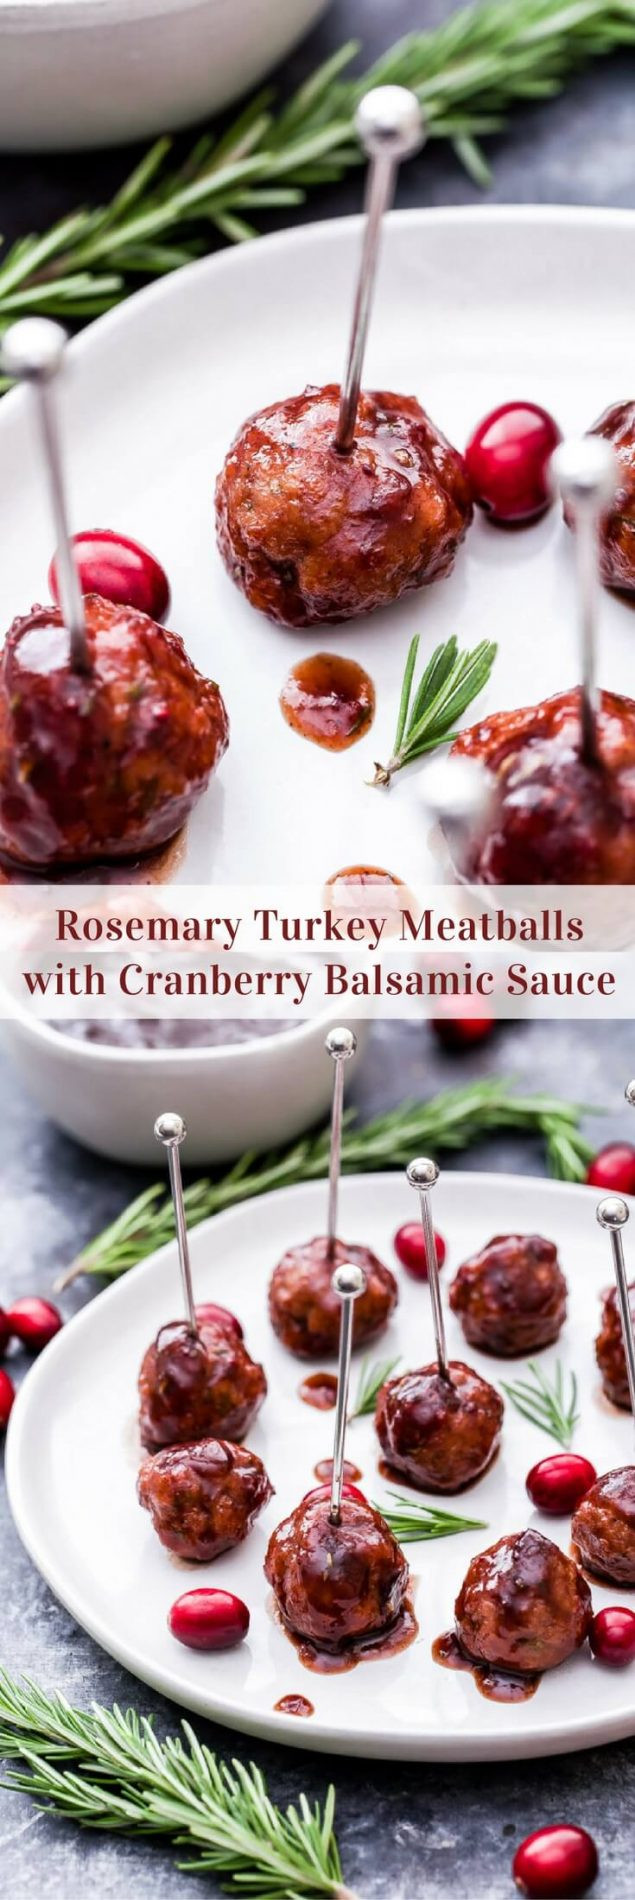 Sauces For Appetizer Meatballs
 Rosemary Turkey Meatballs with Cranberry Balsamic Sauce